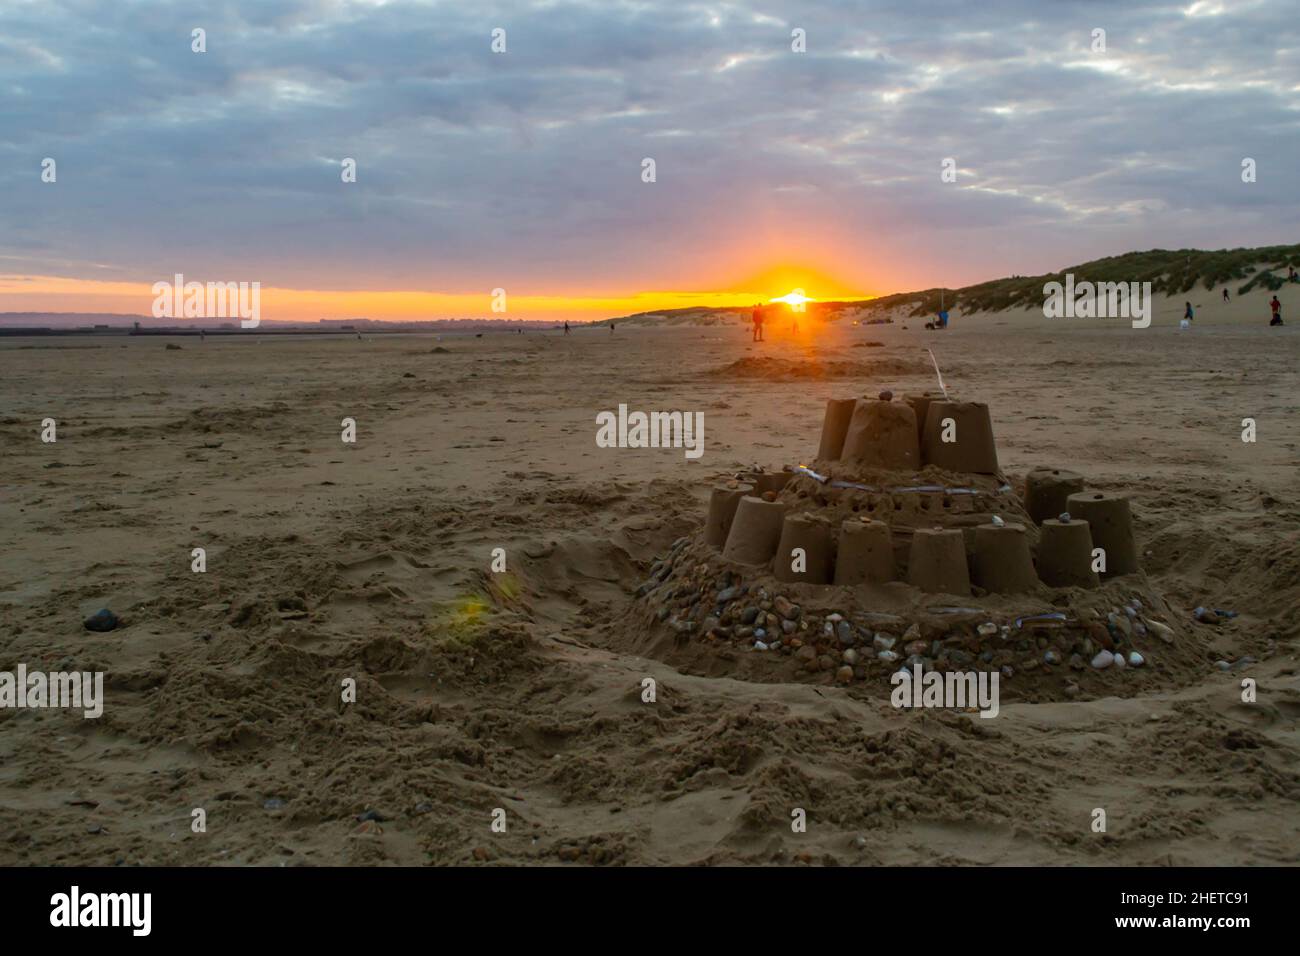 Large sandcastle on Camber Sands beach at sunset in England Stock Photo